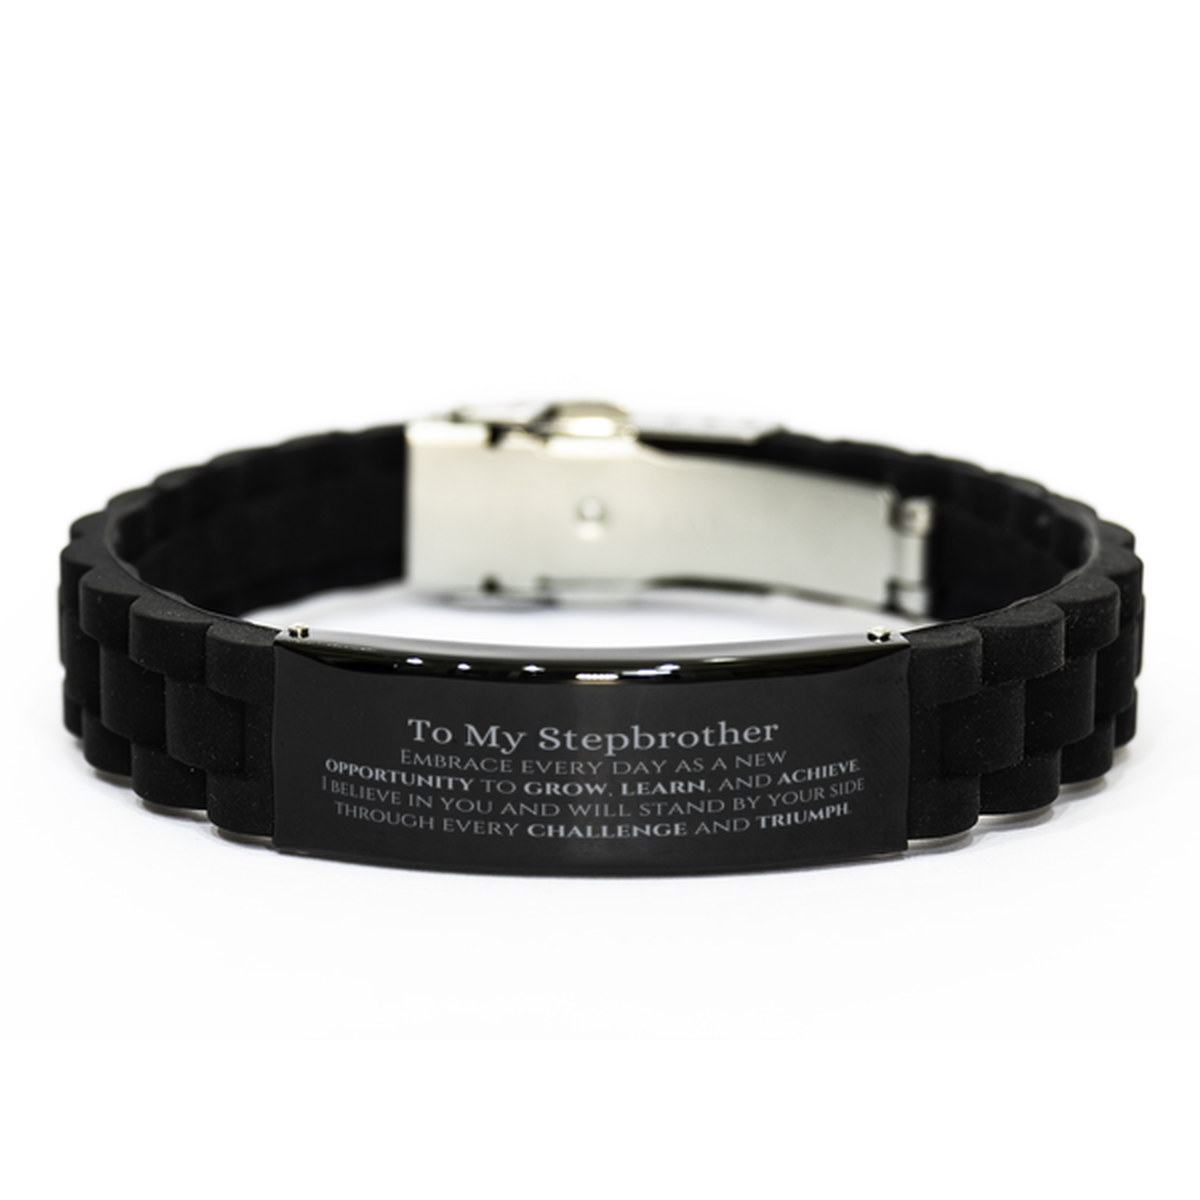 To My Stepbrother Gifts, I believe in you and will stand by your side, Inspirational Black Glidelock Clasp Bracelet For Stepbrother, Birthday Christmas Motivational Stepbrother Gifts